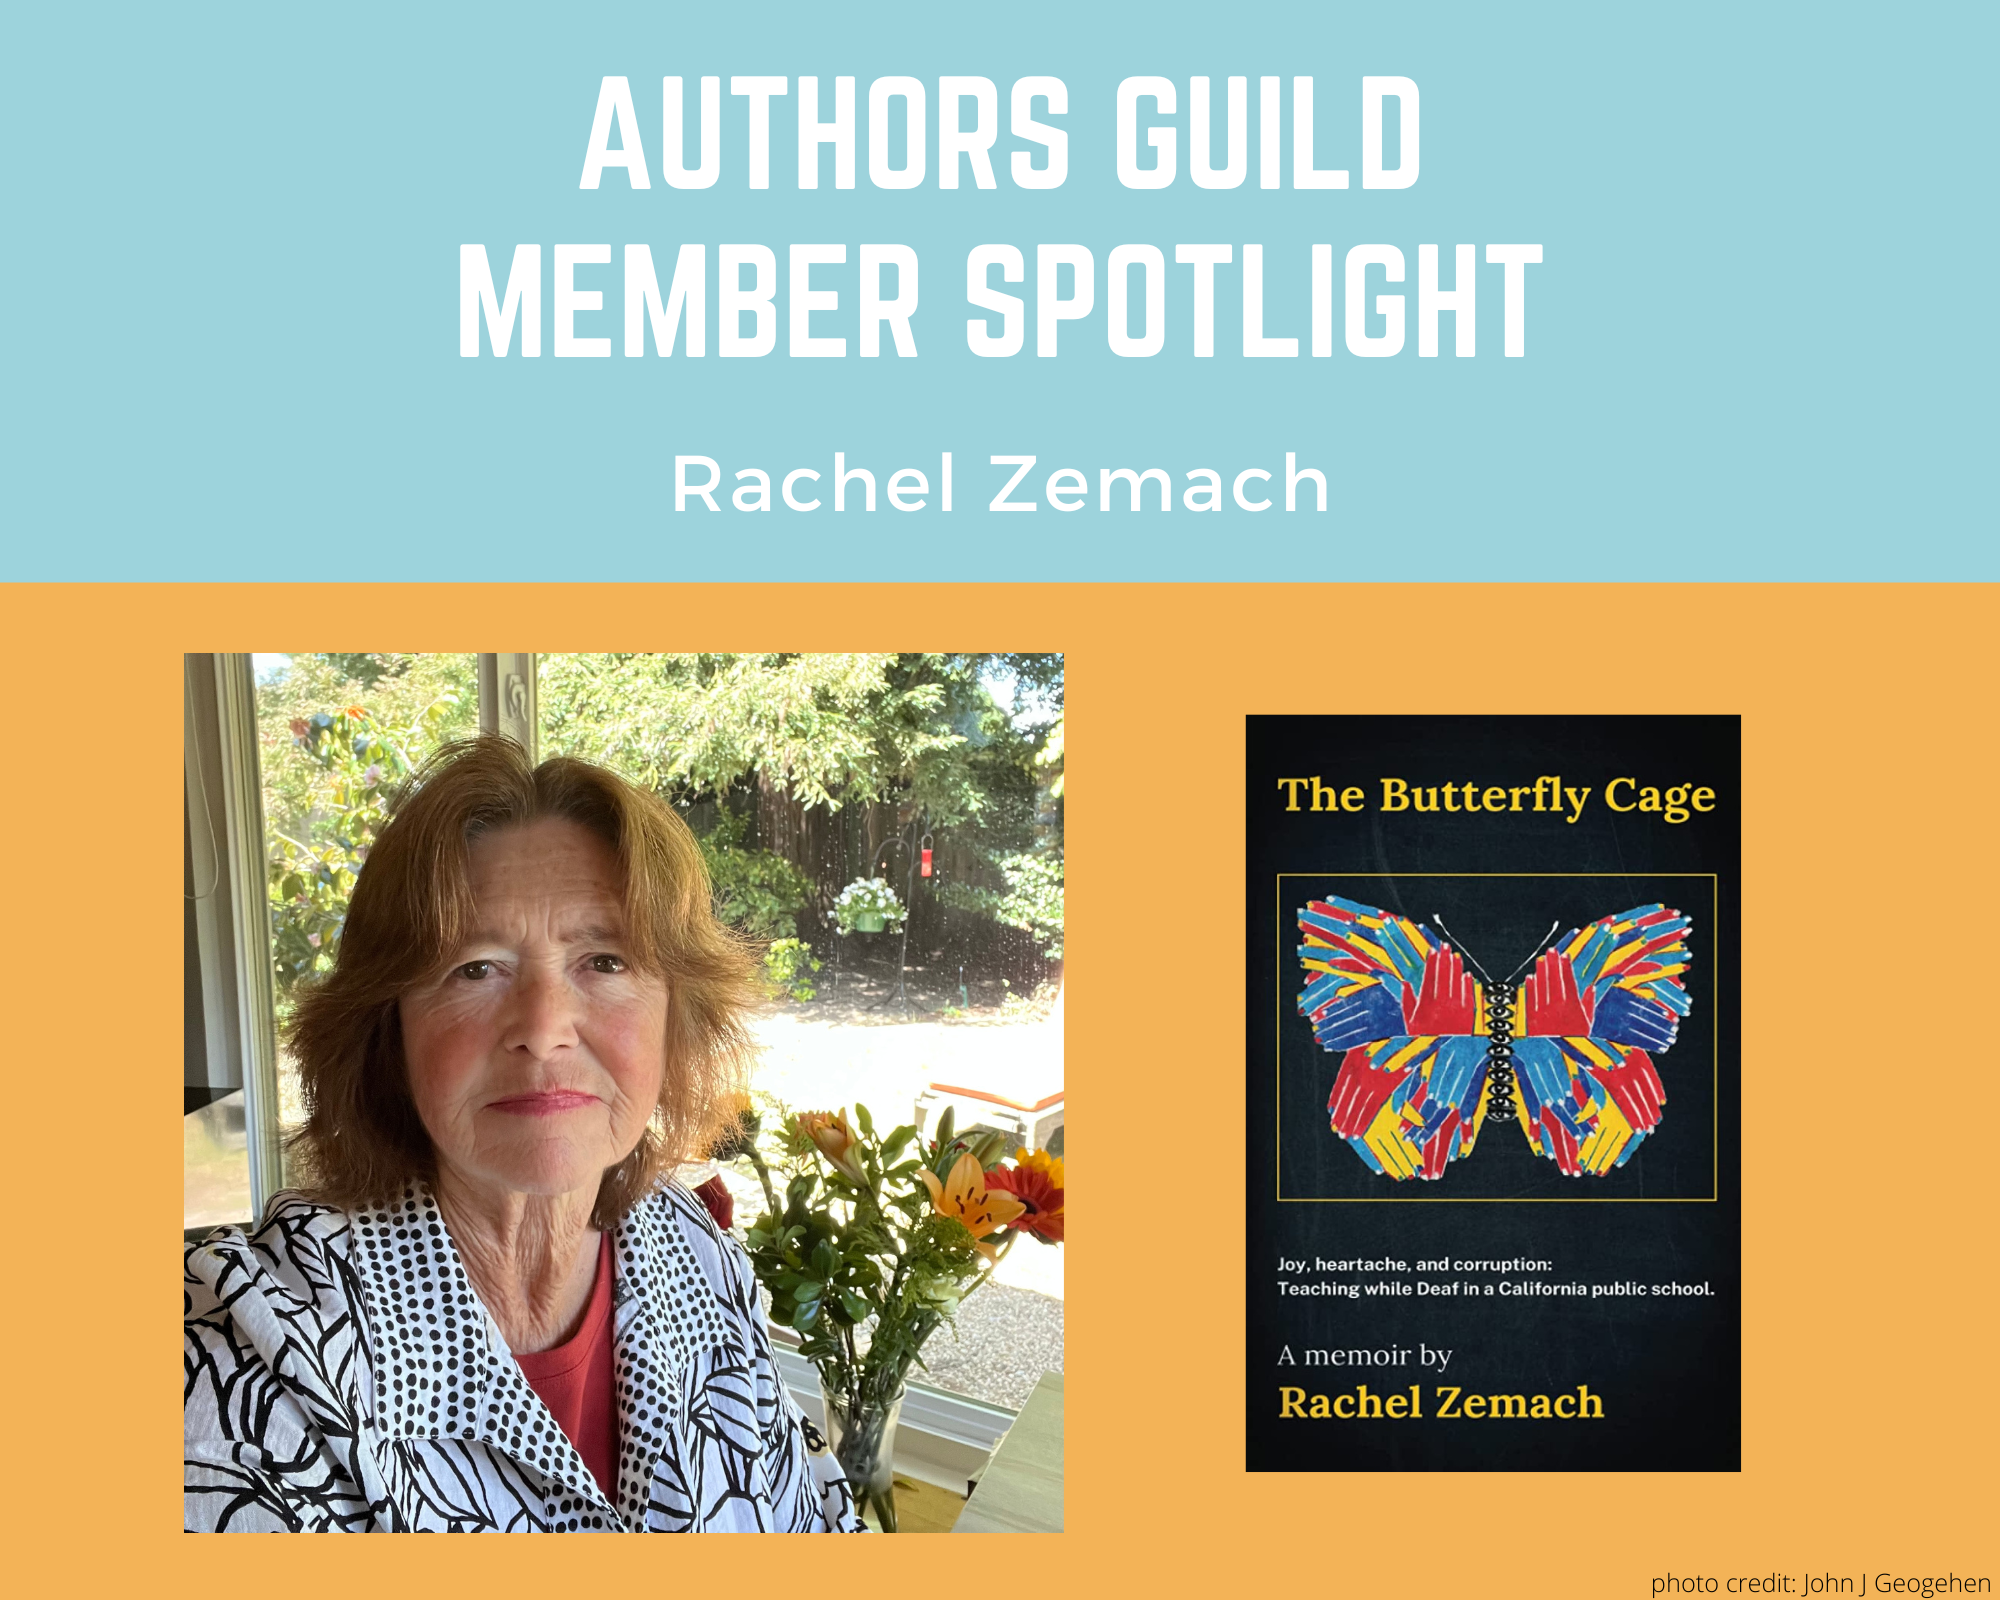 author Rachel Zemach and an image of her book The Butterfly Cage